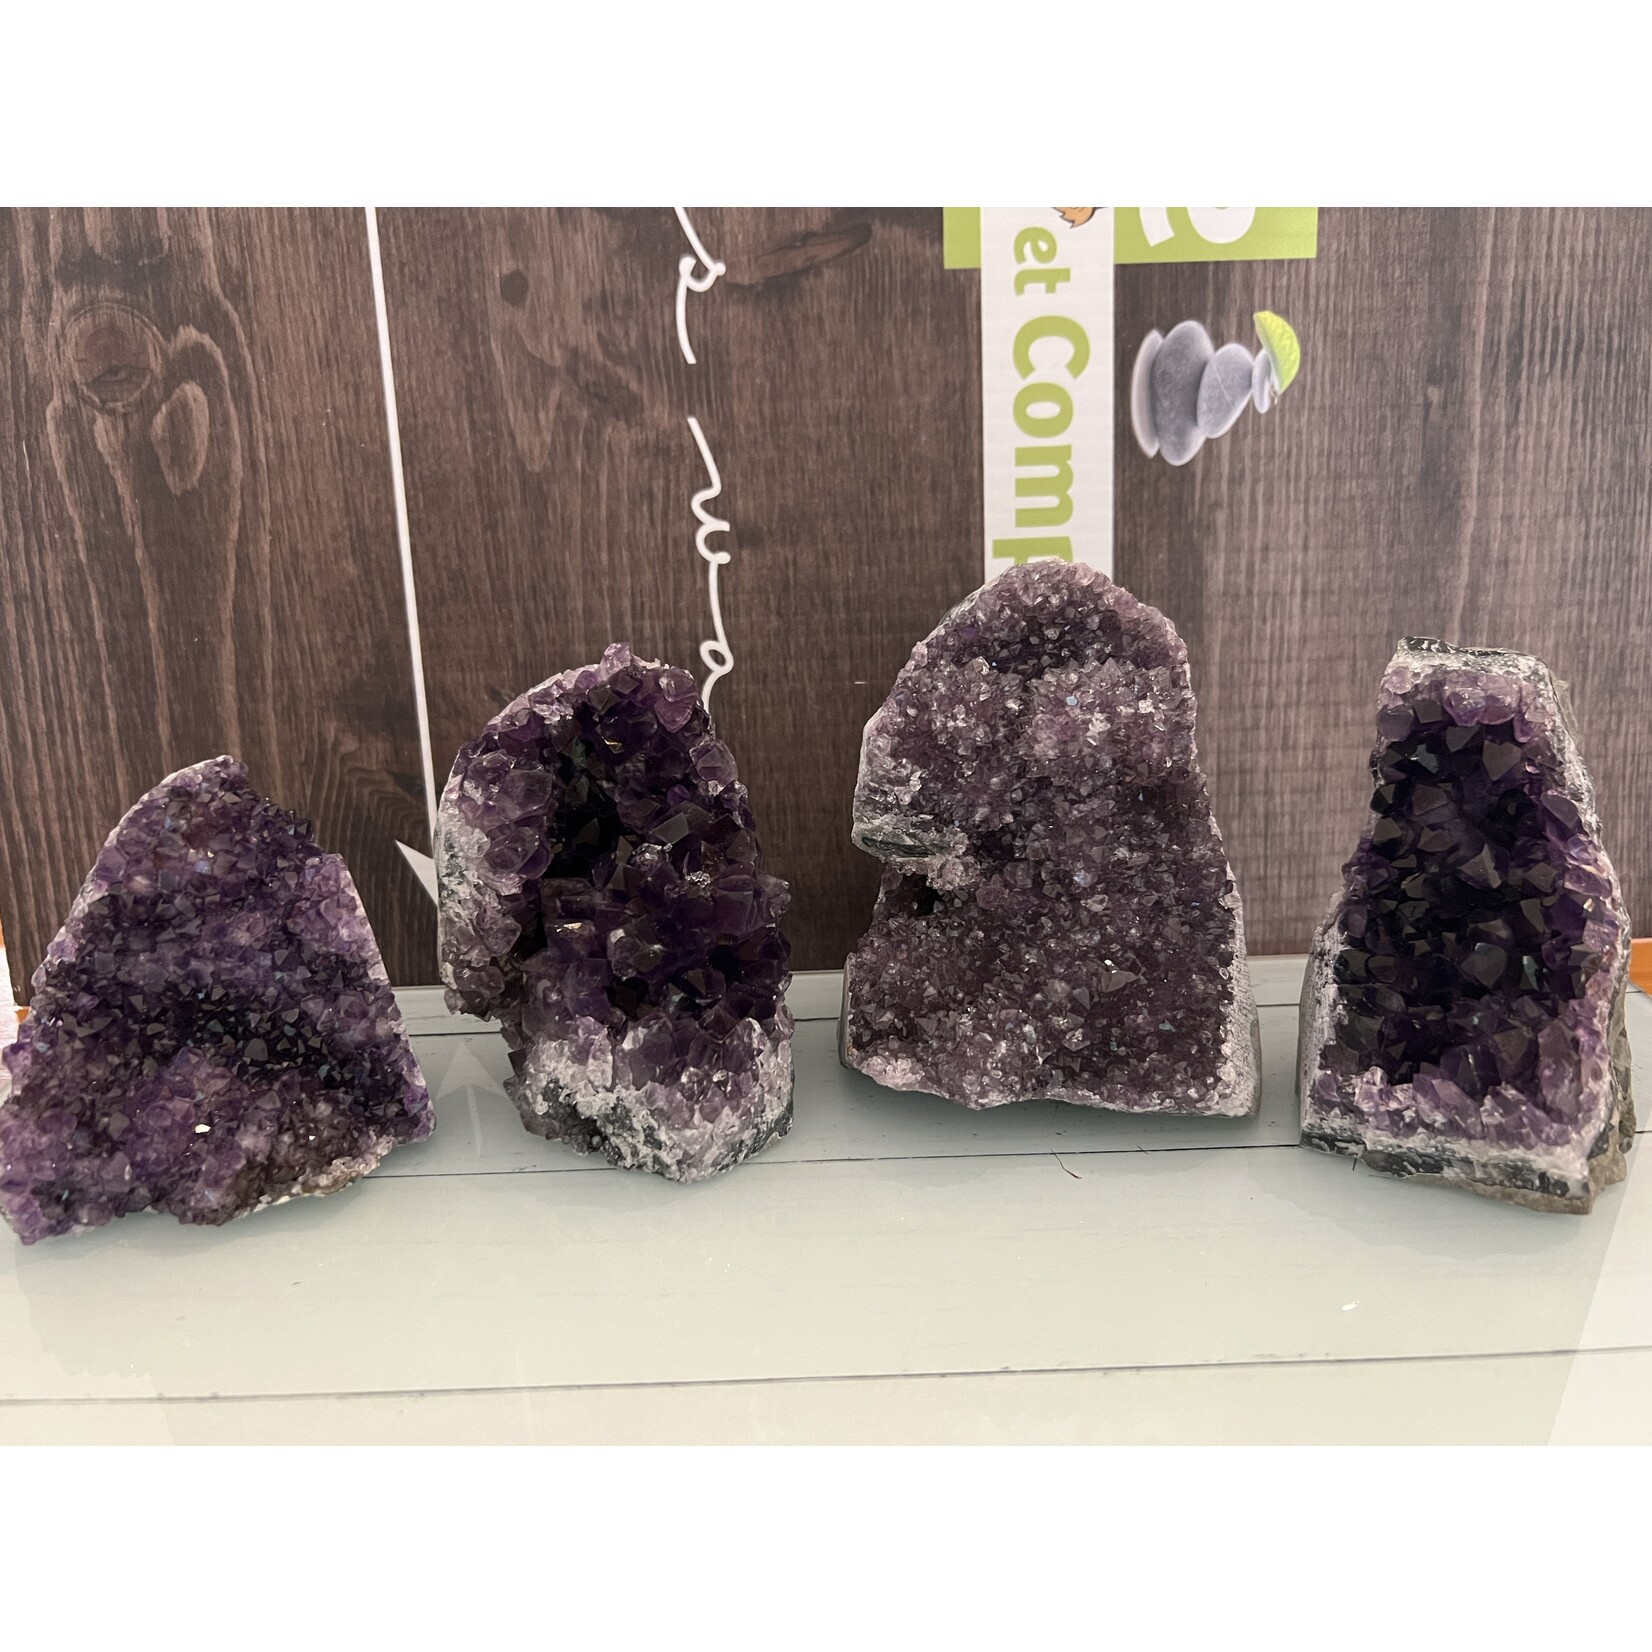 Exquisite Brazilian Amethyst Geode of Great Quality- Promoting Spiritual Upliftment, Concentration, and Meditation